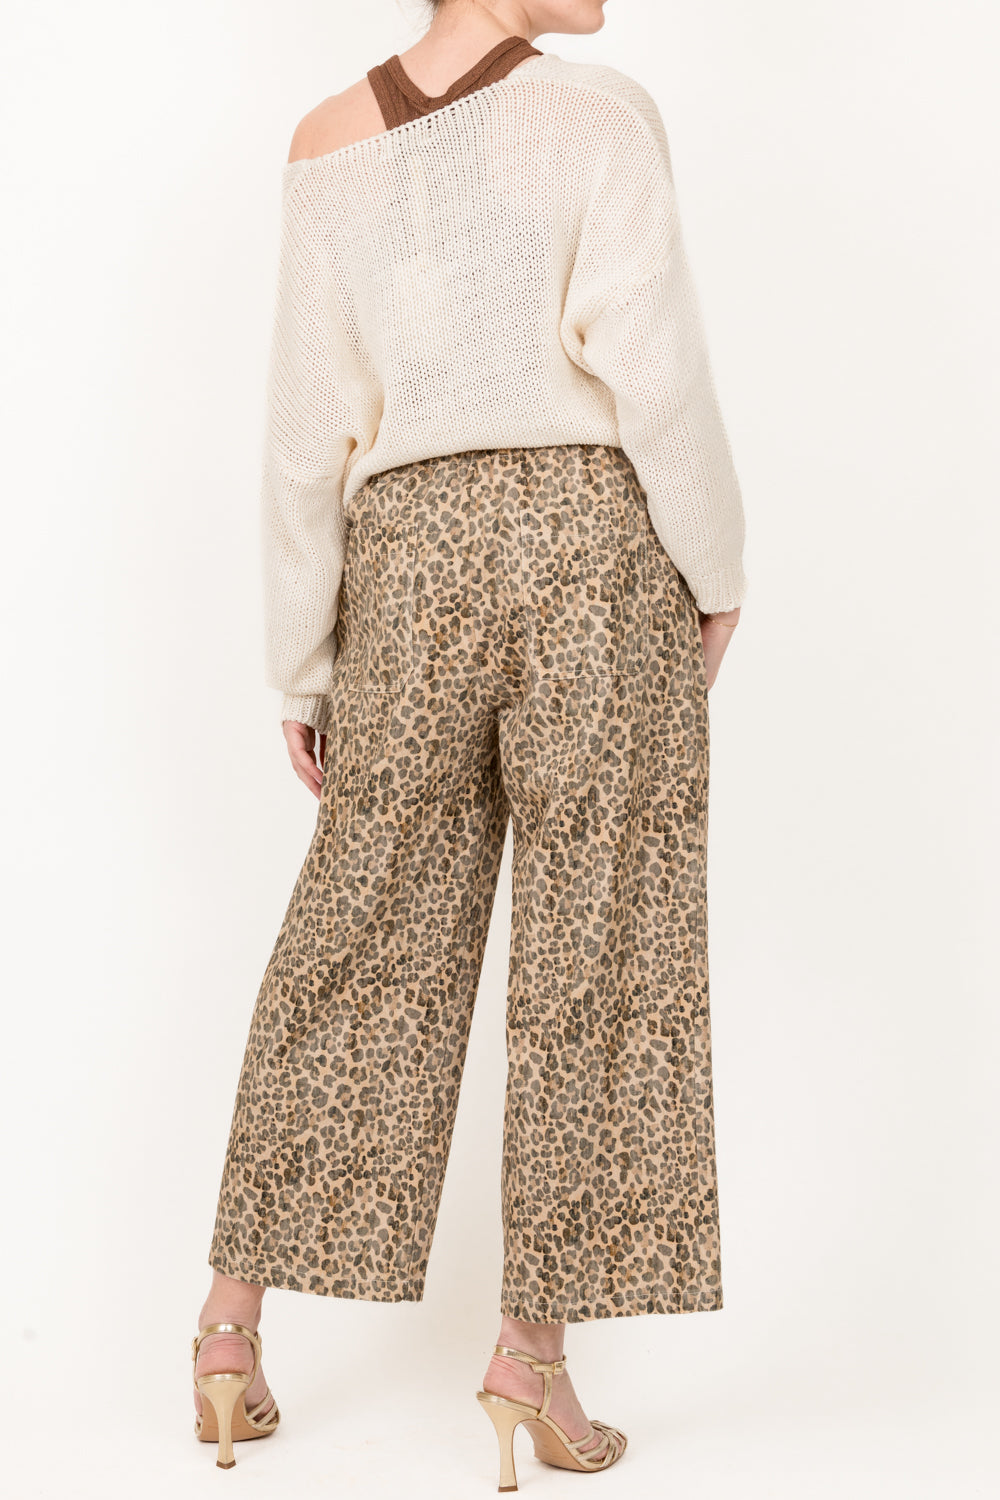 Tensione in - Pantalone animalier con coulisse Art. GO533